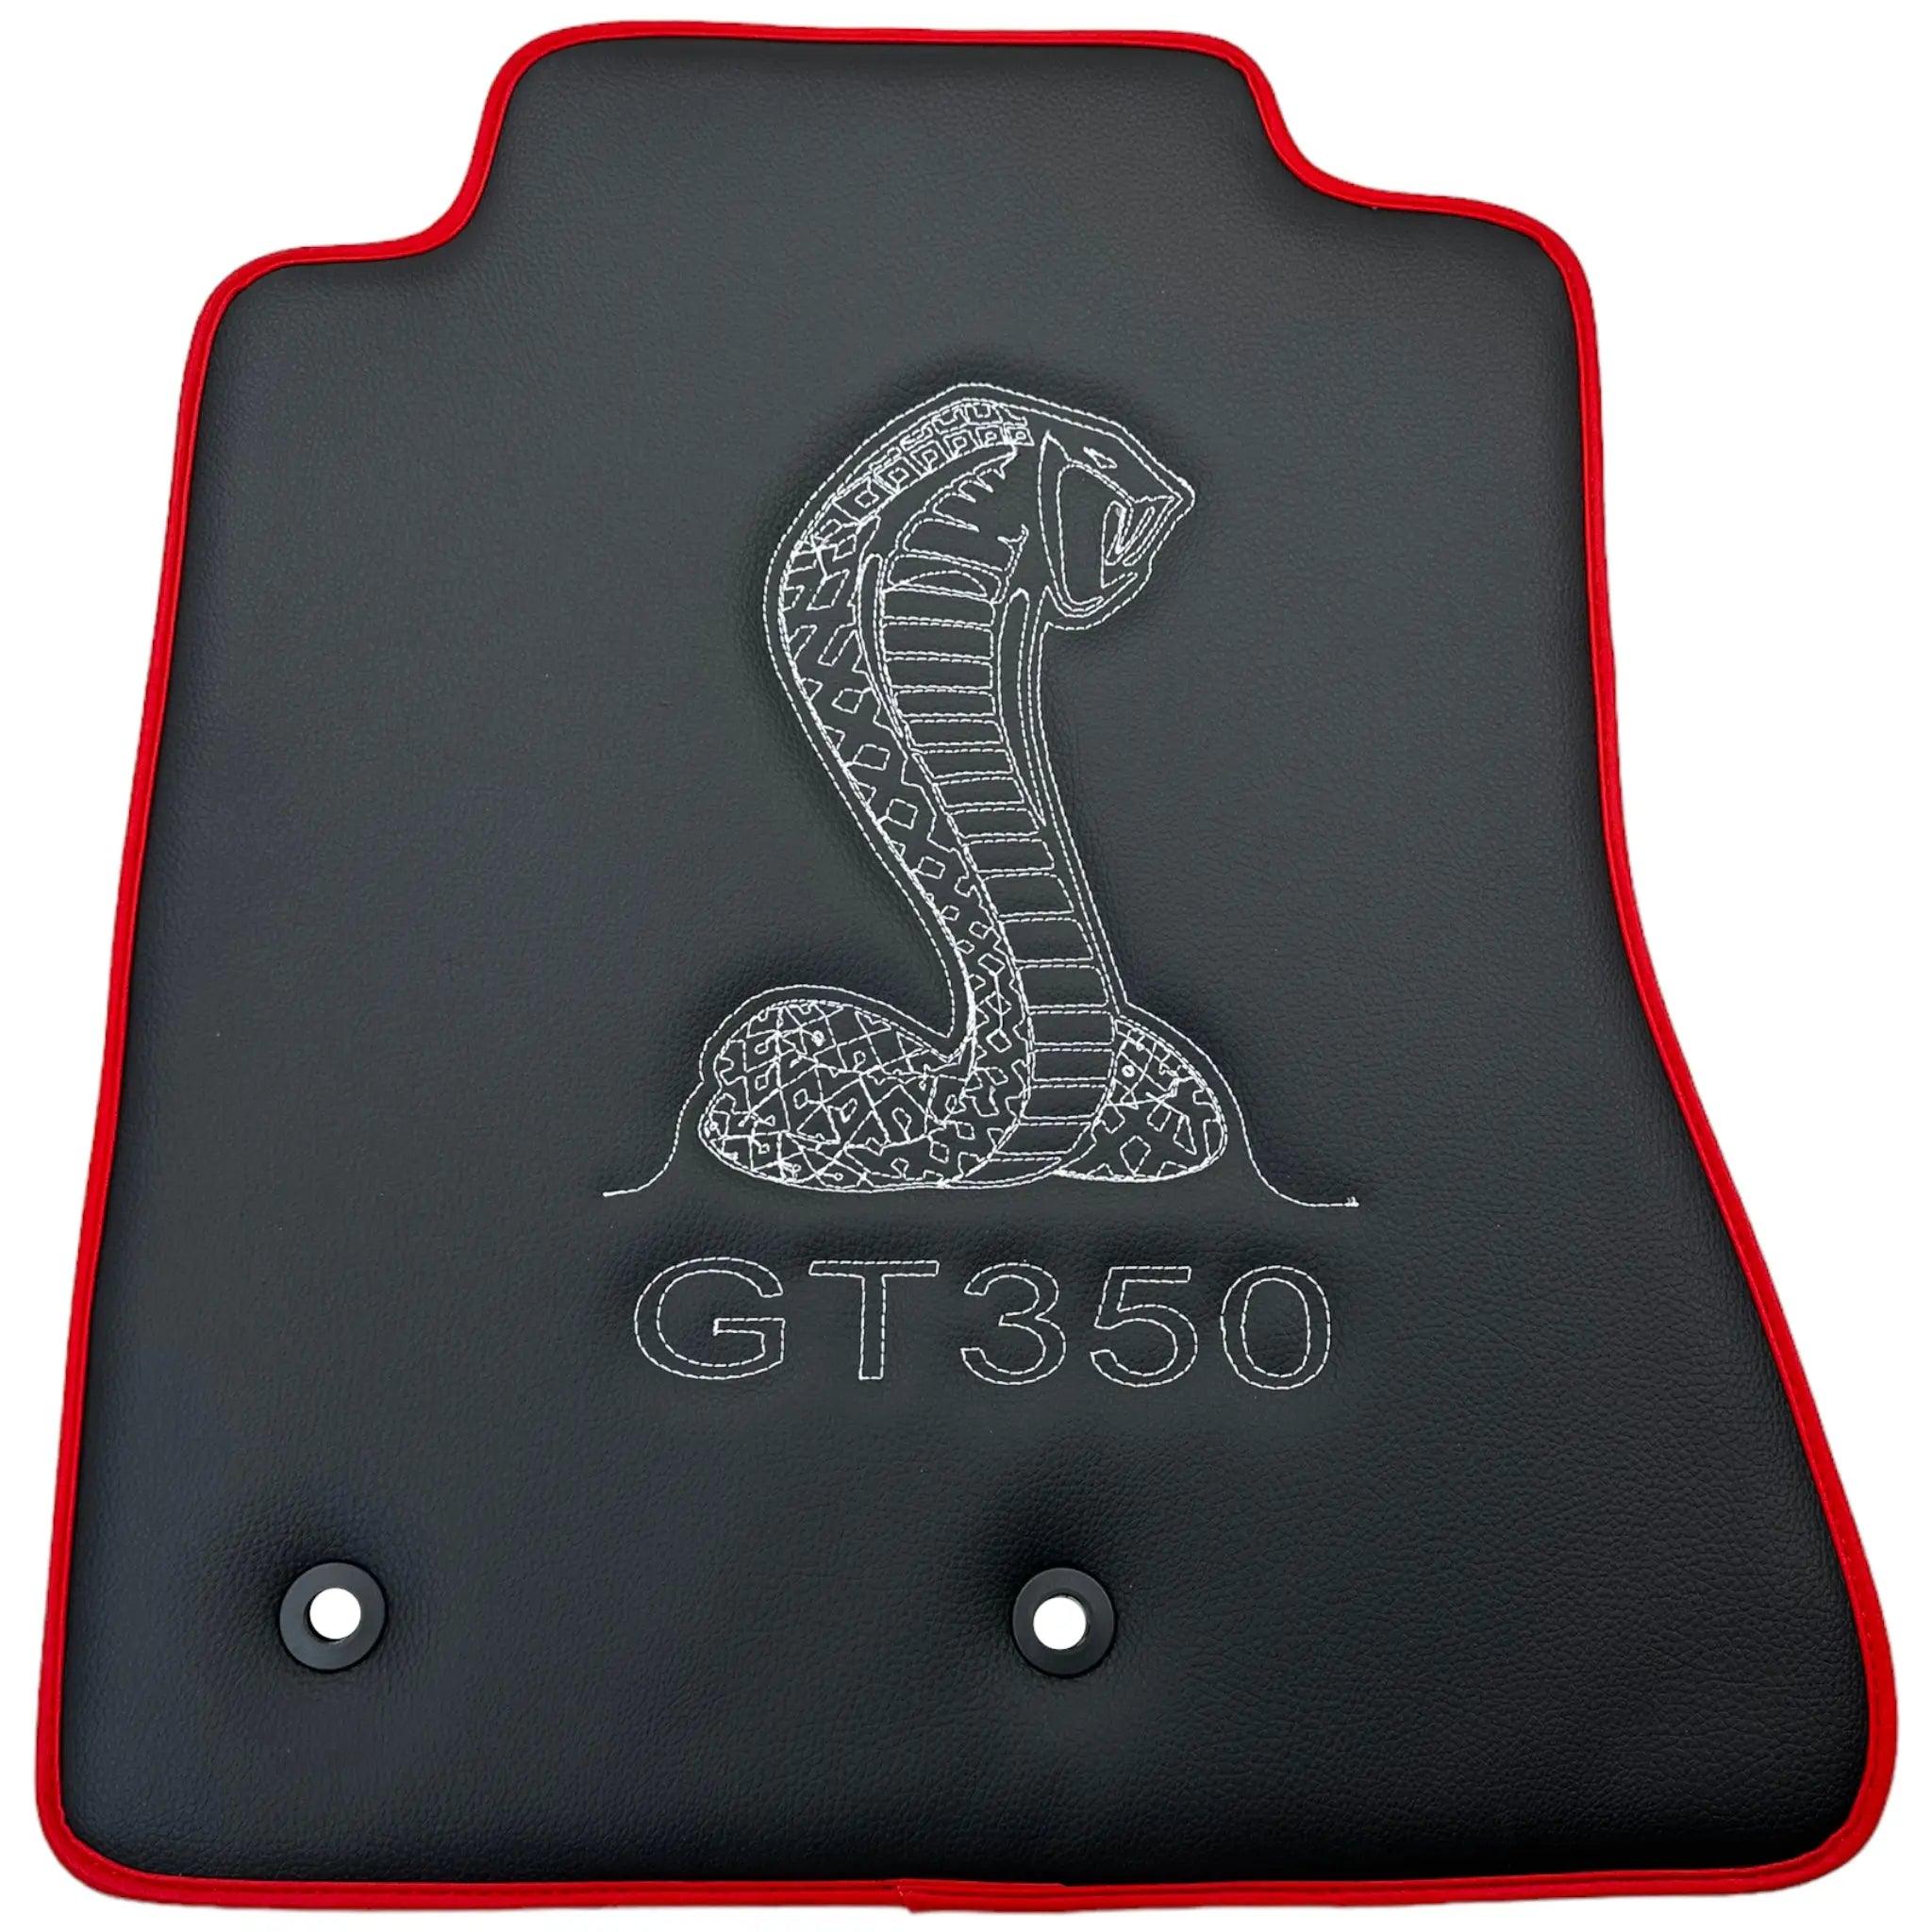 Leather Floor Mats with Red Trim for Ford Mustang GT350 Shelby (2015-2021) with Cobra Sewing